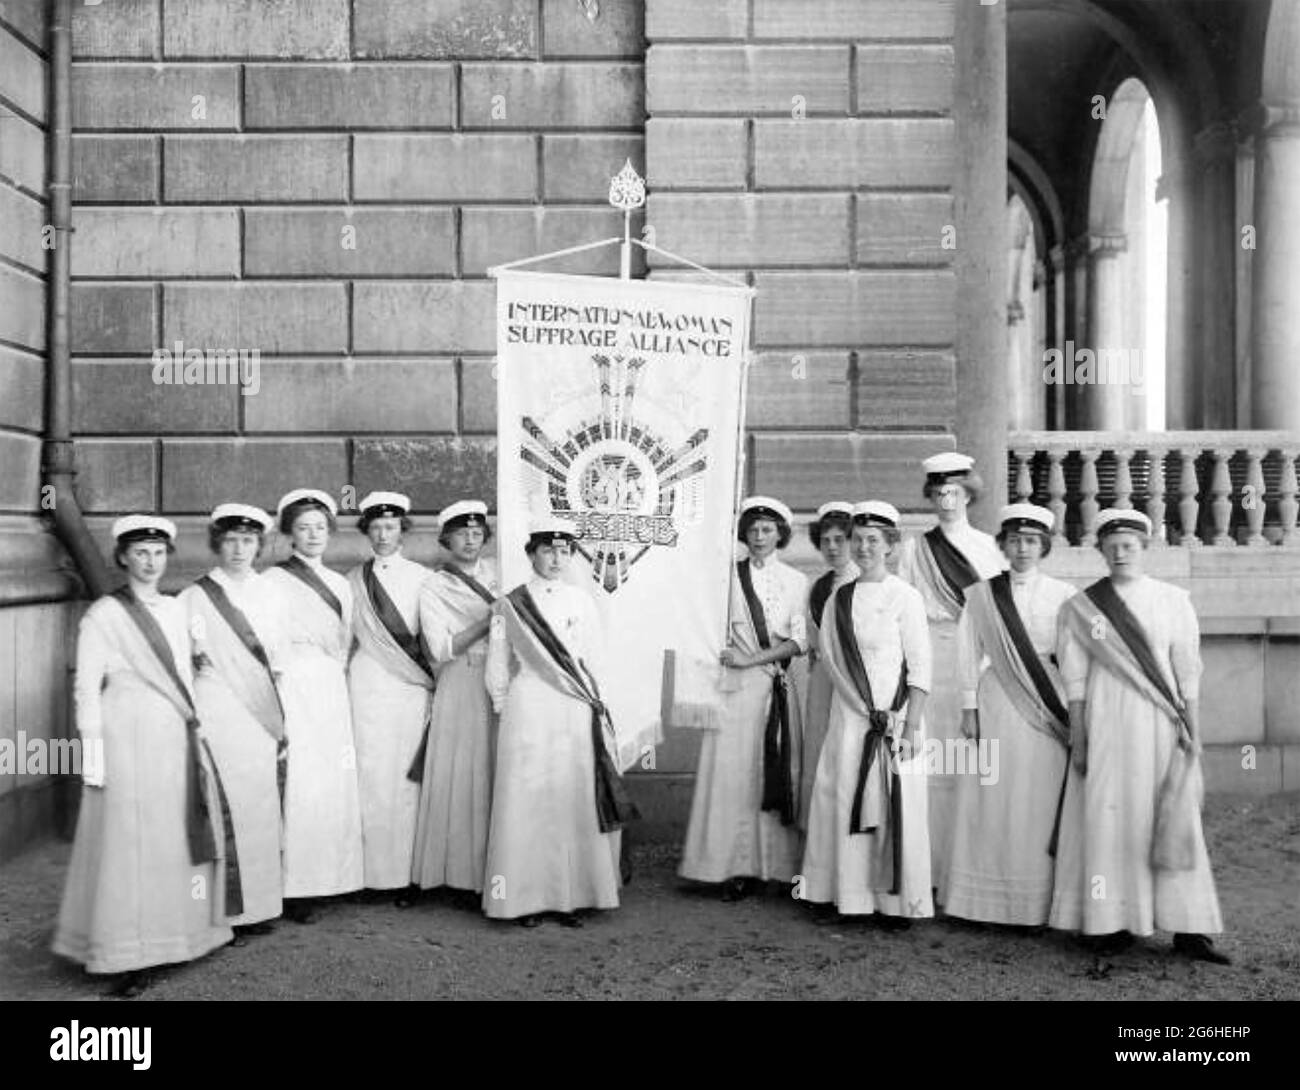 INTERNATIONAL WOMAN SUFFRAGE ALLIANCE at the Congress in Stockholm in 1911.  A Swedish group pose with their banner. Stock Photo